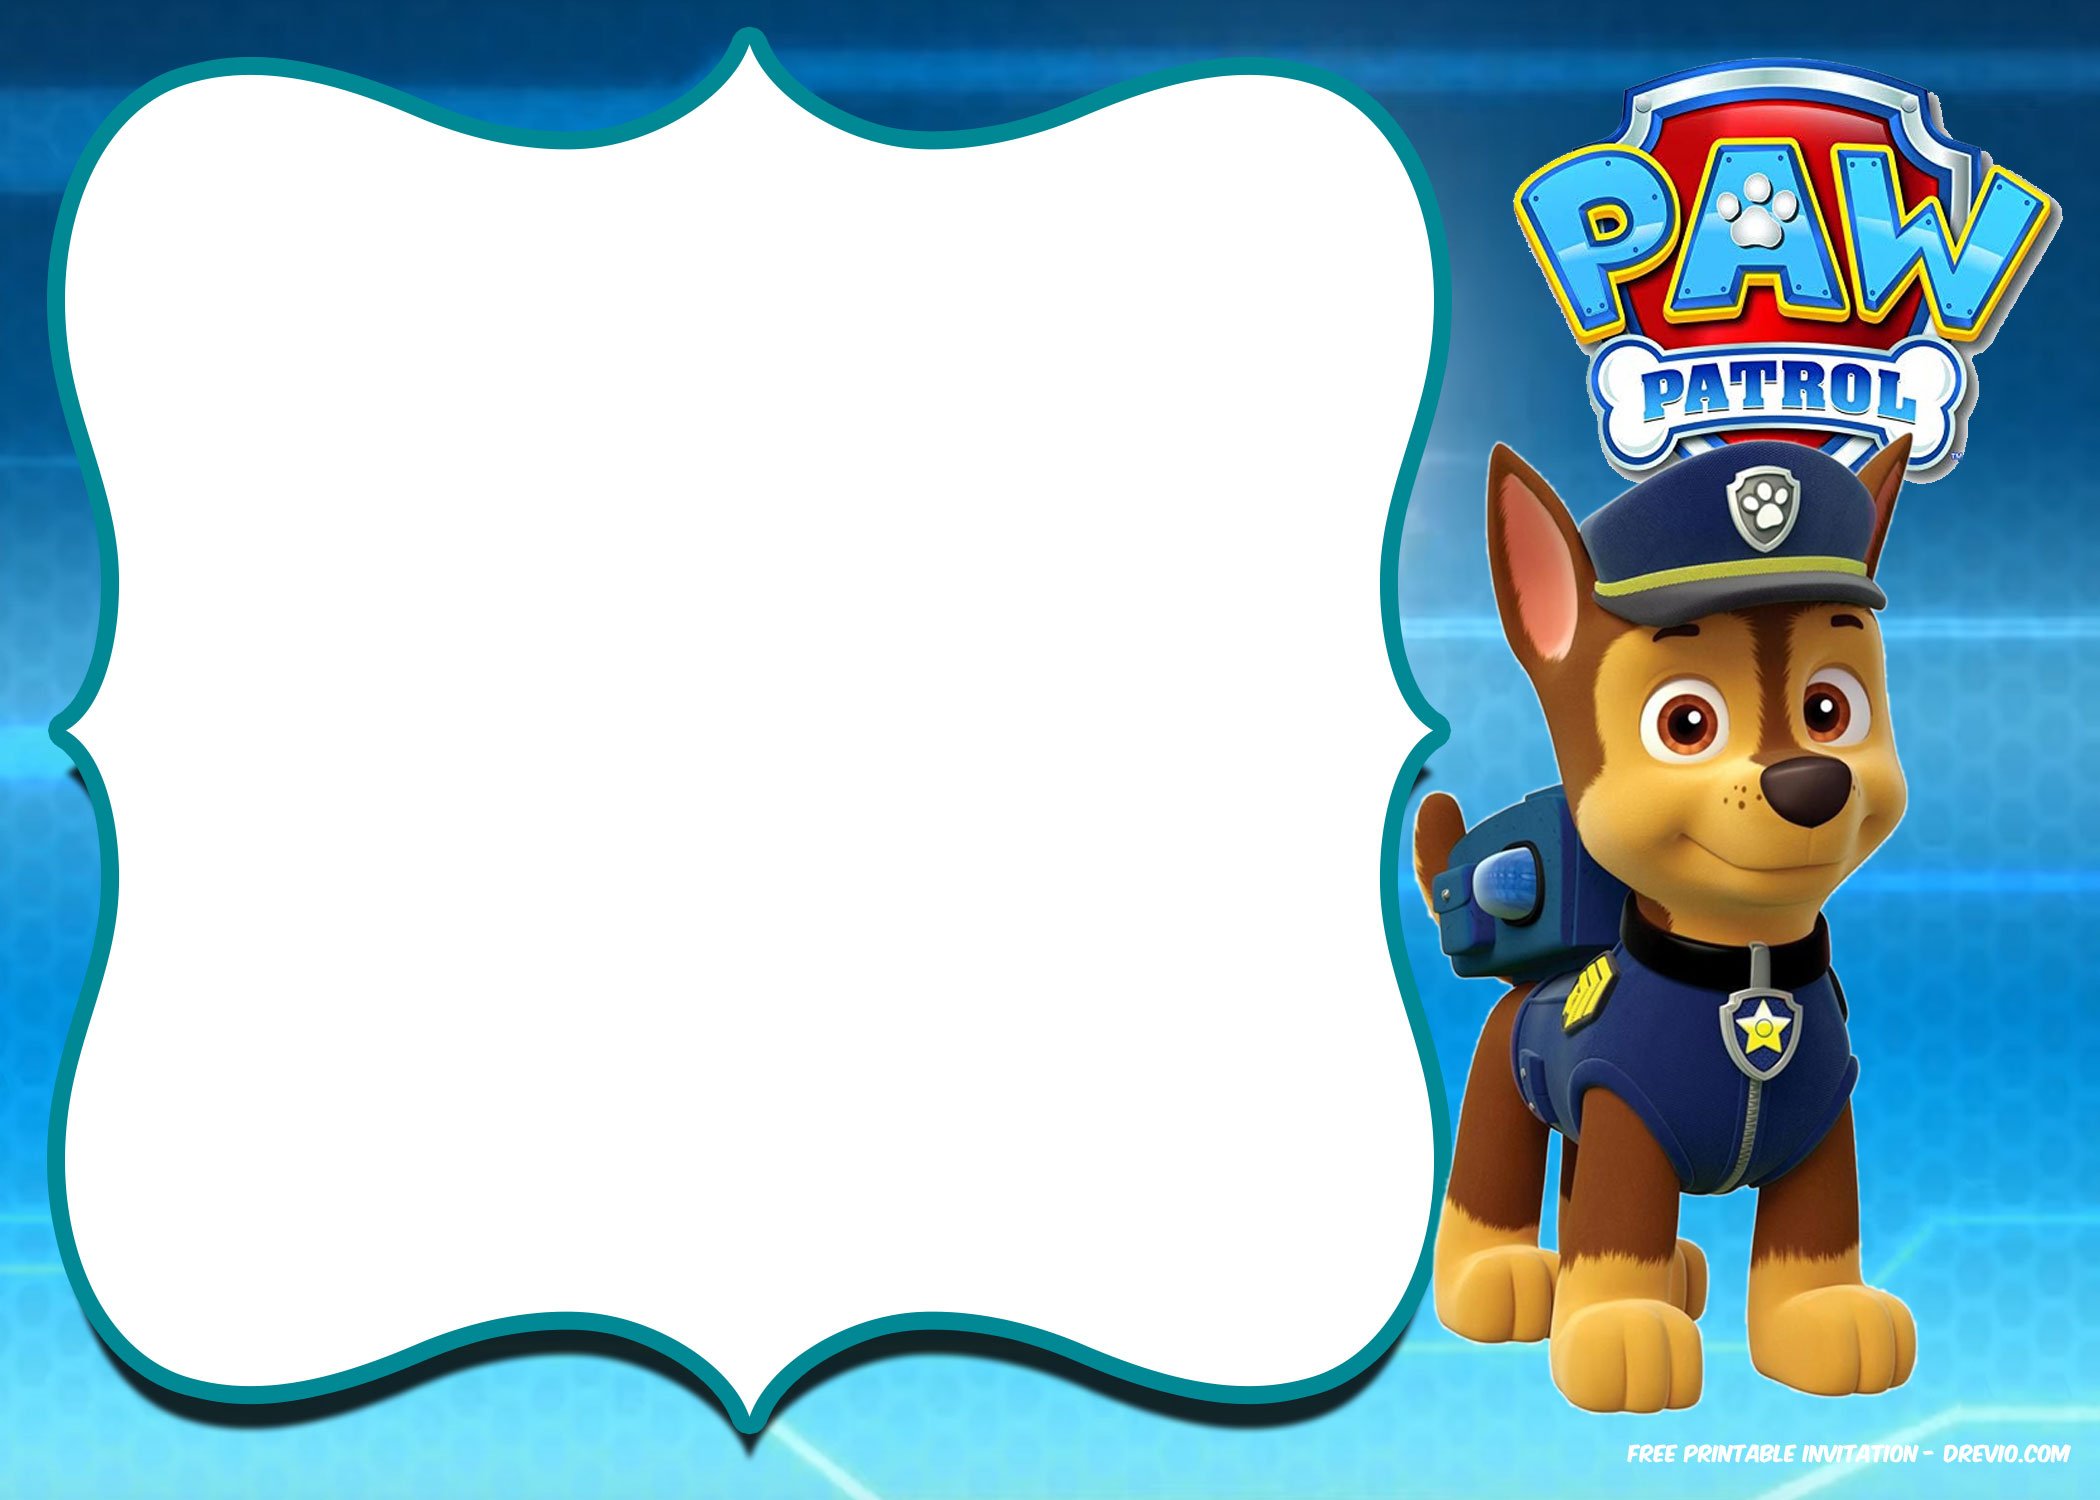 paw-patrol-invitation-with-freeee-thank-you-card-paw-patrolparty